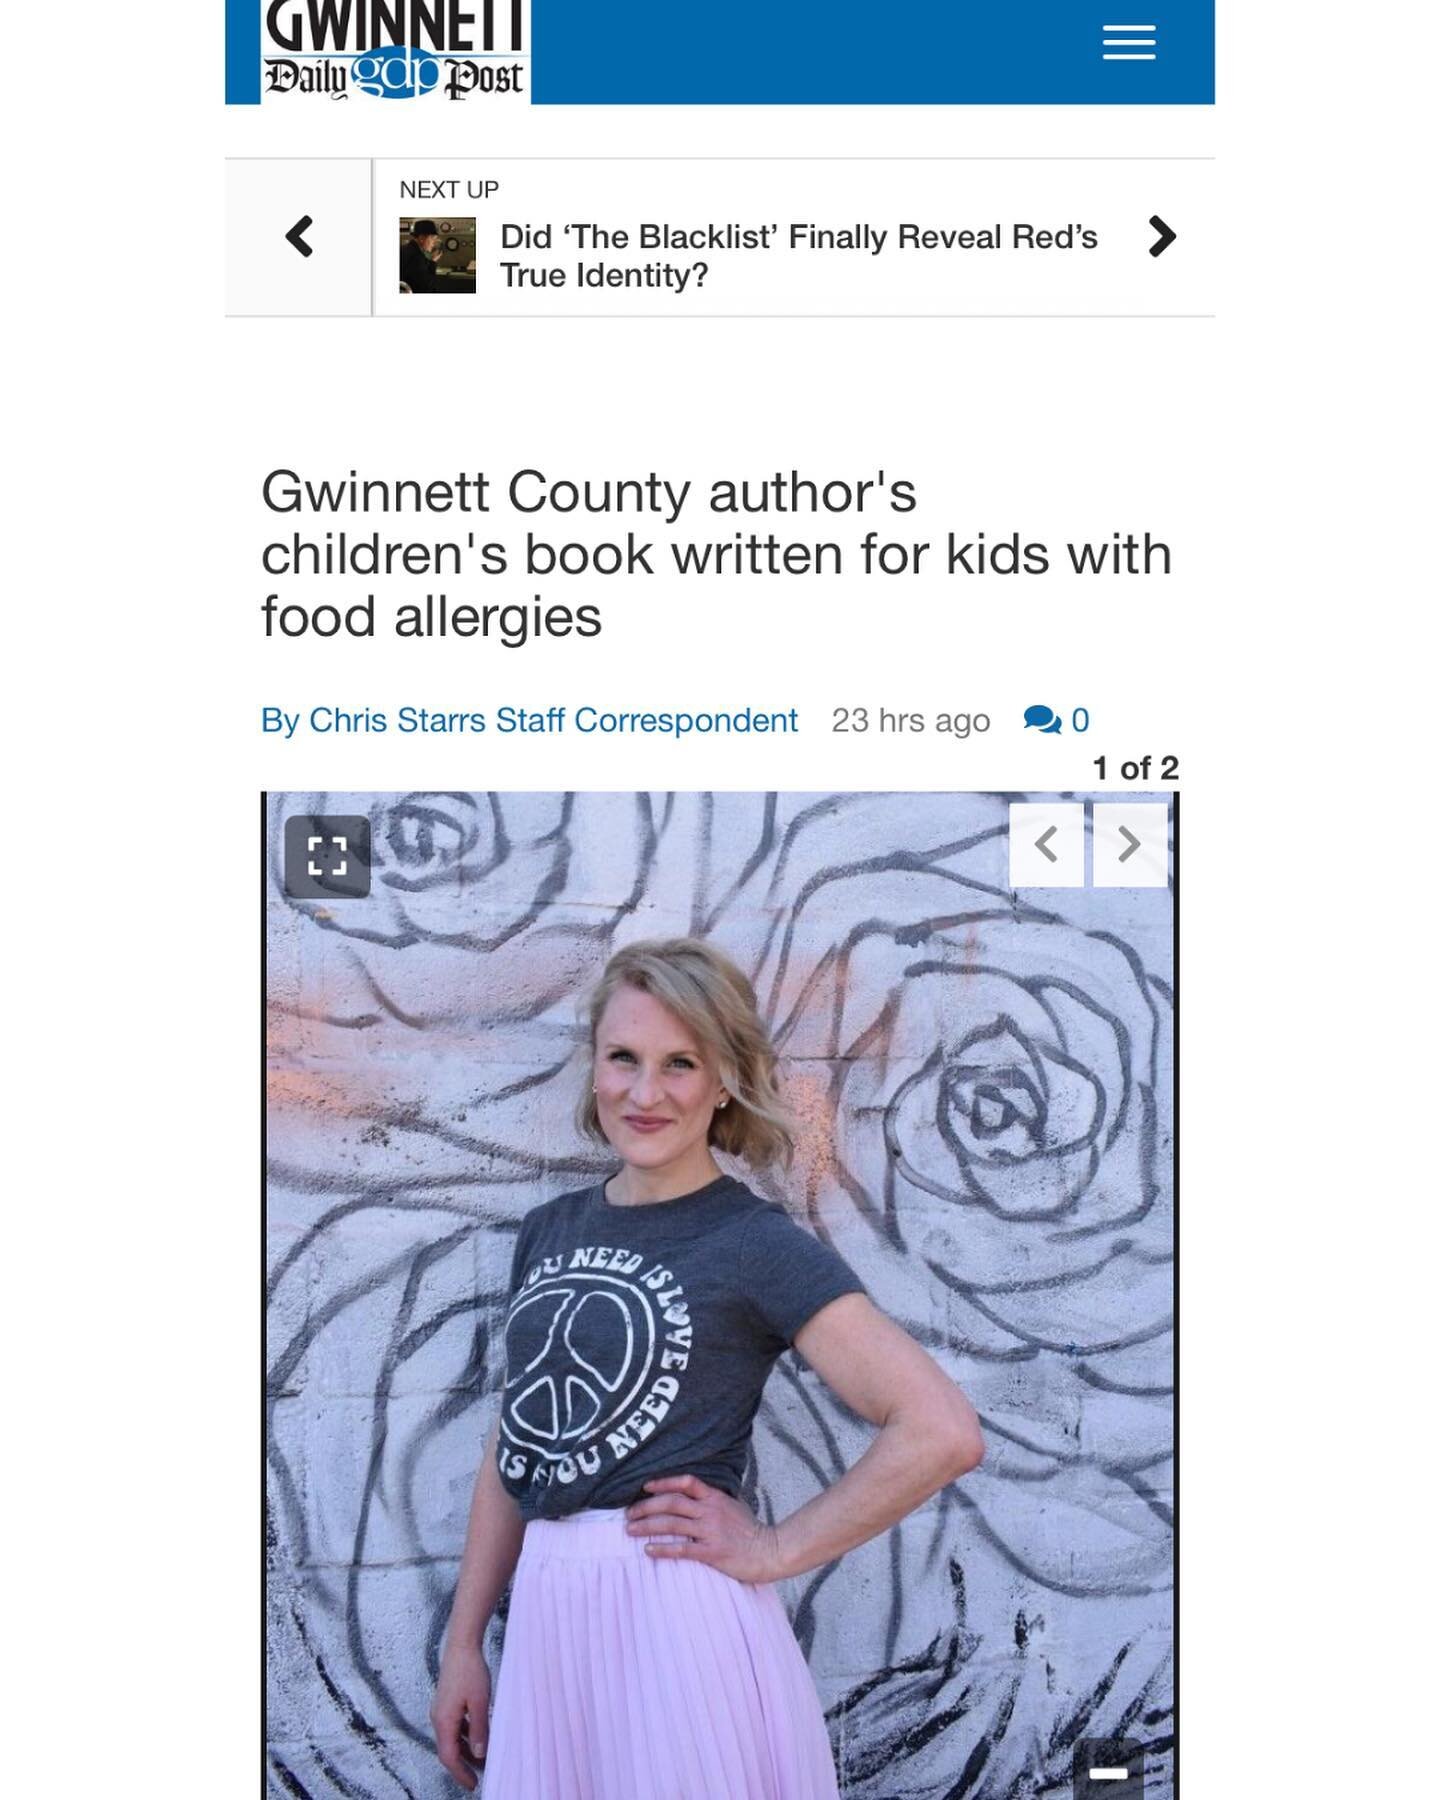 Happy Friday to me! I&rsquo;m currently celebrating this feature article with my hometown newspaper @gwinnettdailypost, where I discuss growing up with asthma and a nut allergy, and how it led me to start my own business and write Katie Can&rsquo;t E